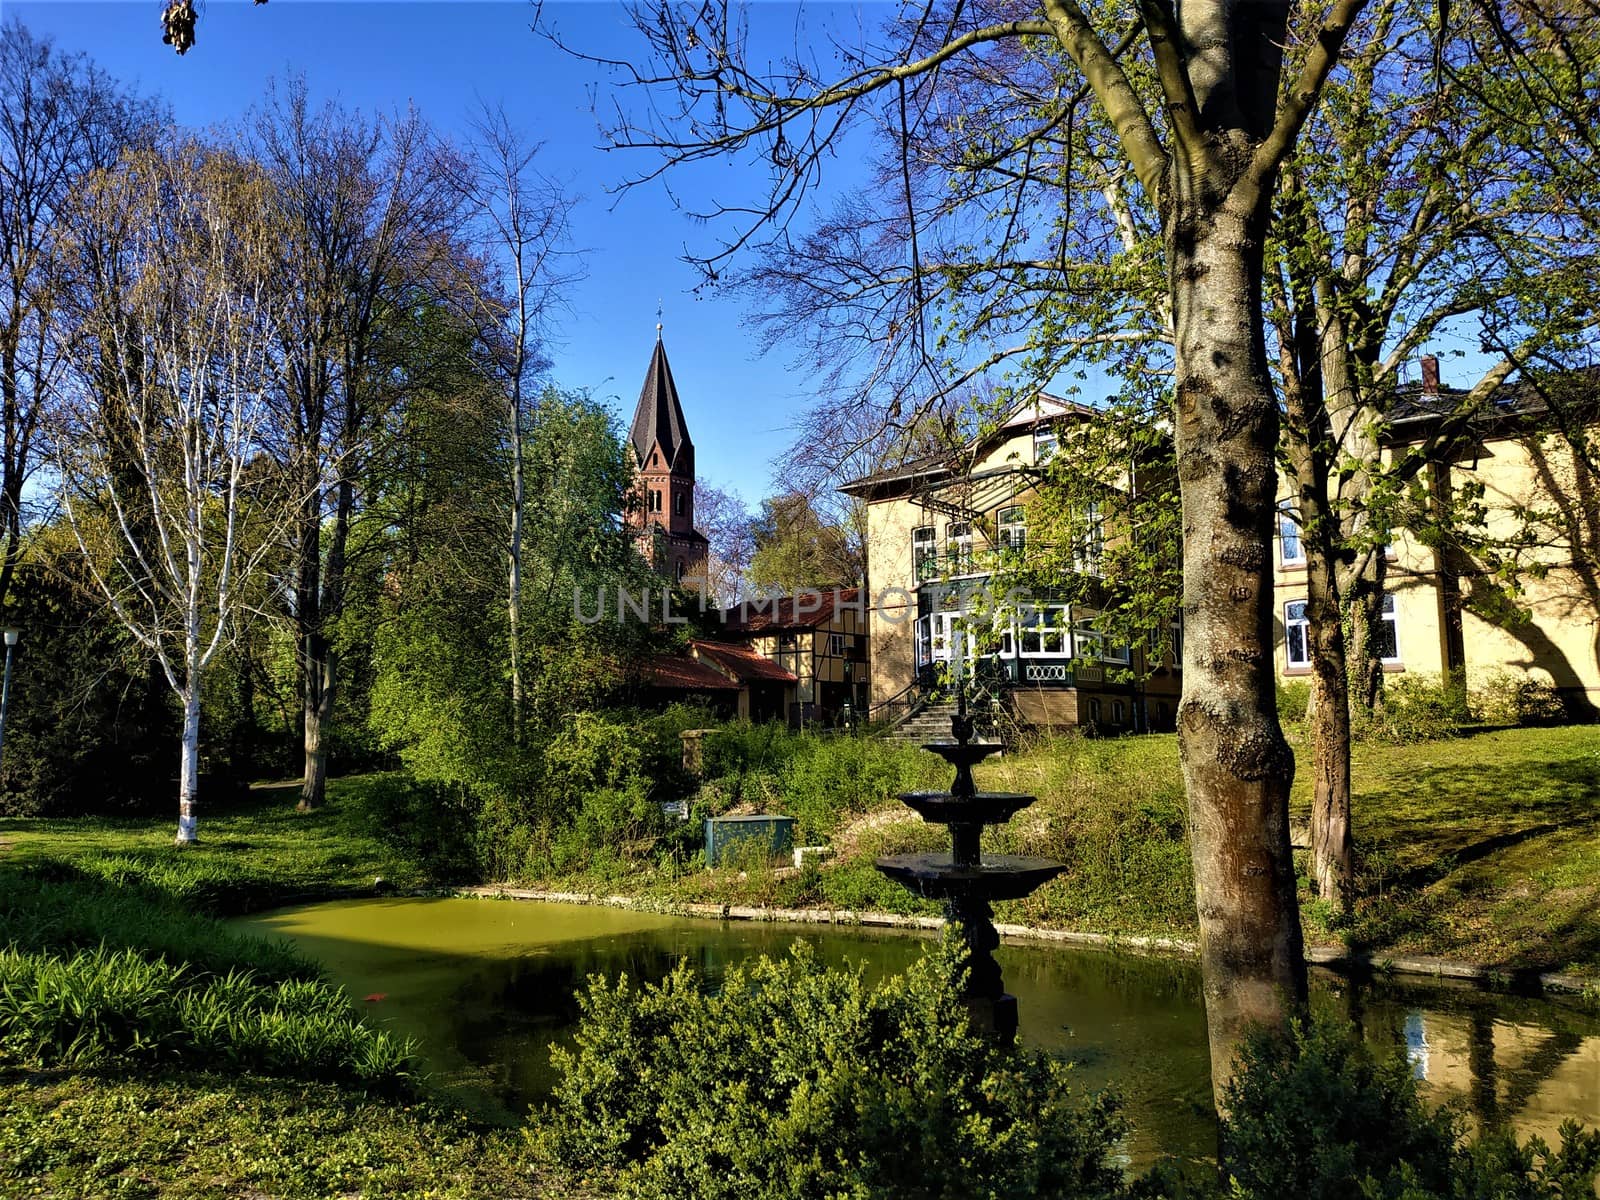 View from central park to the beautiful city of Einbeck, Germany